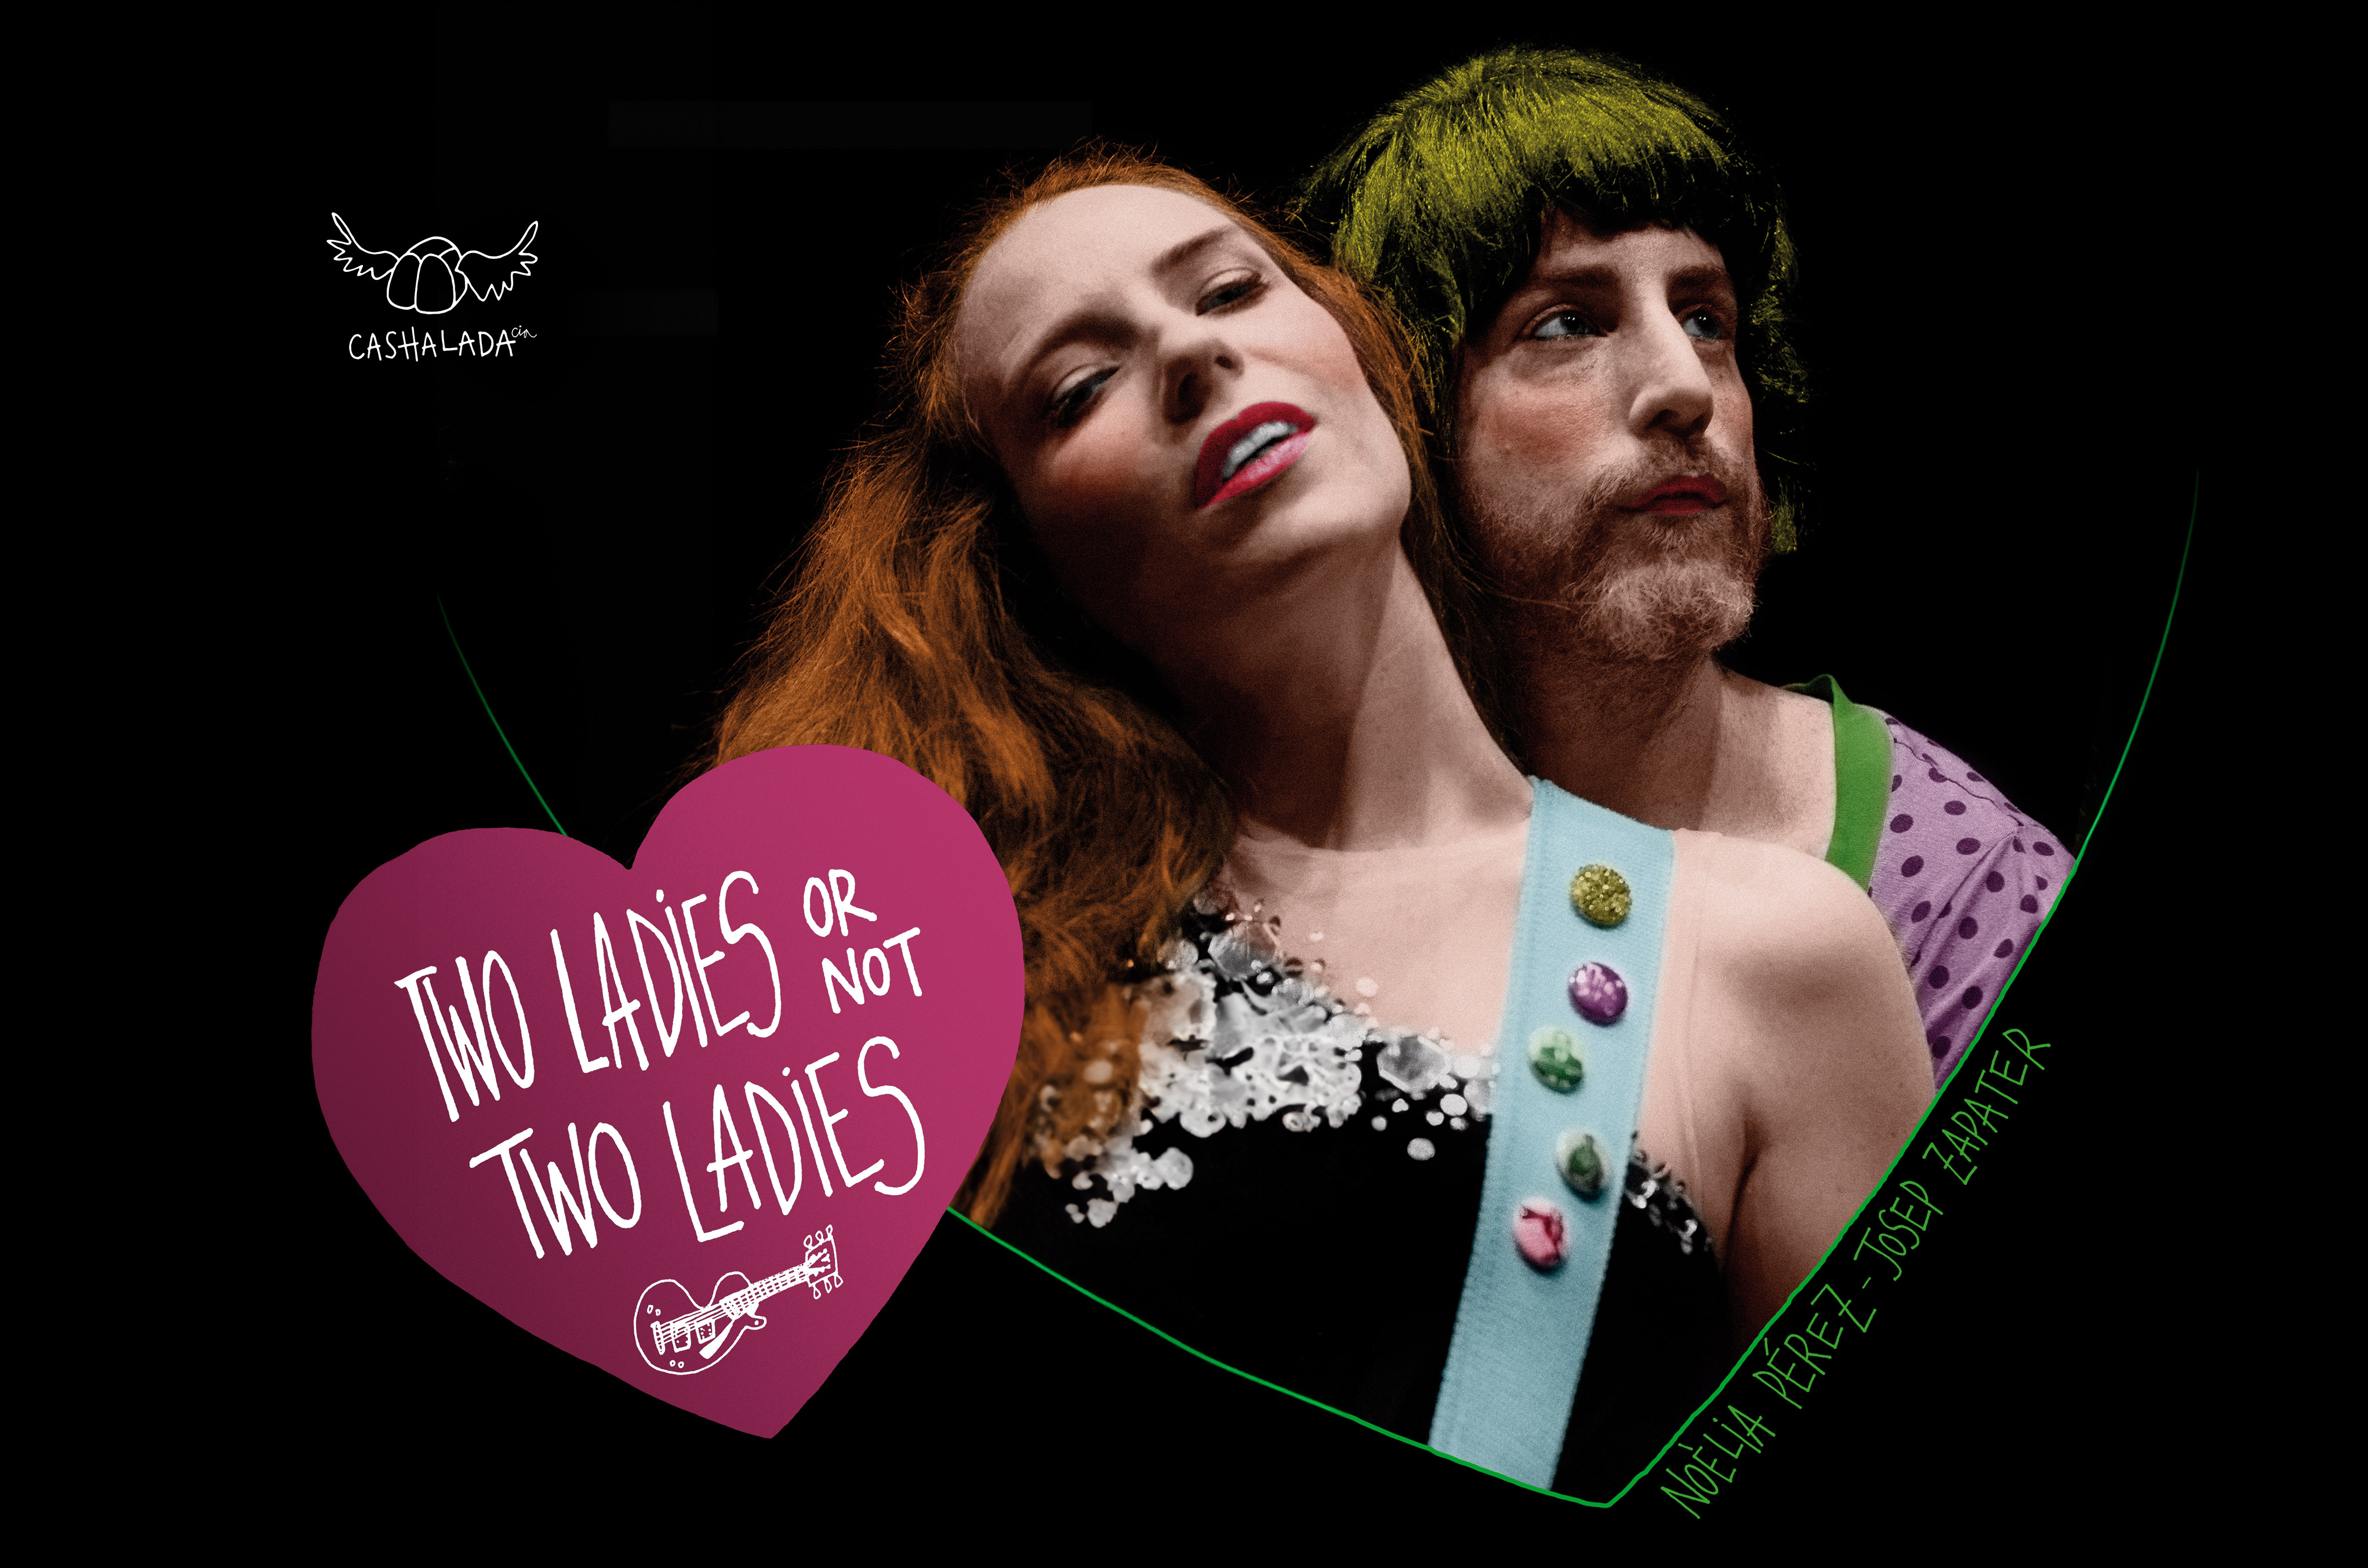 Two ladies or not two ladies cast